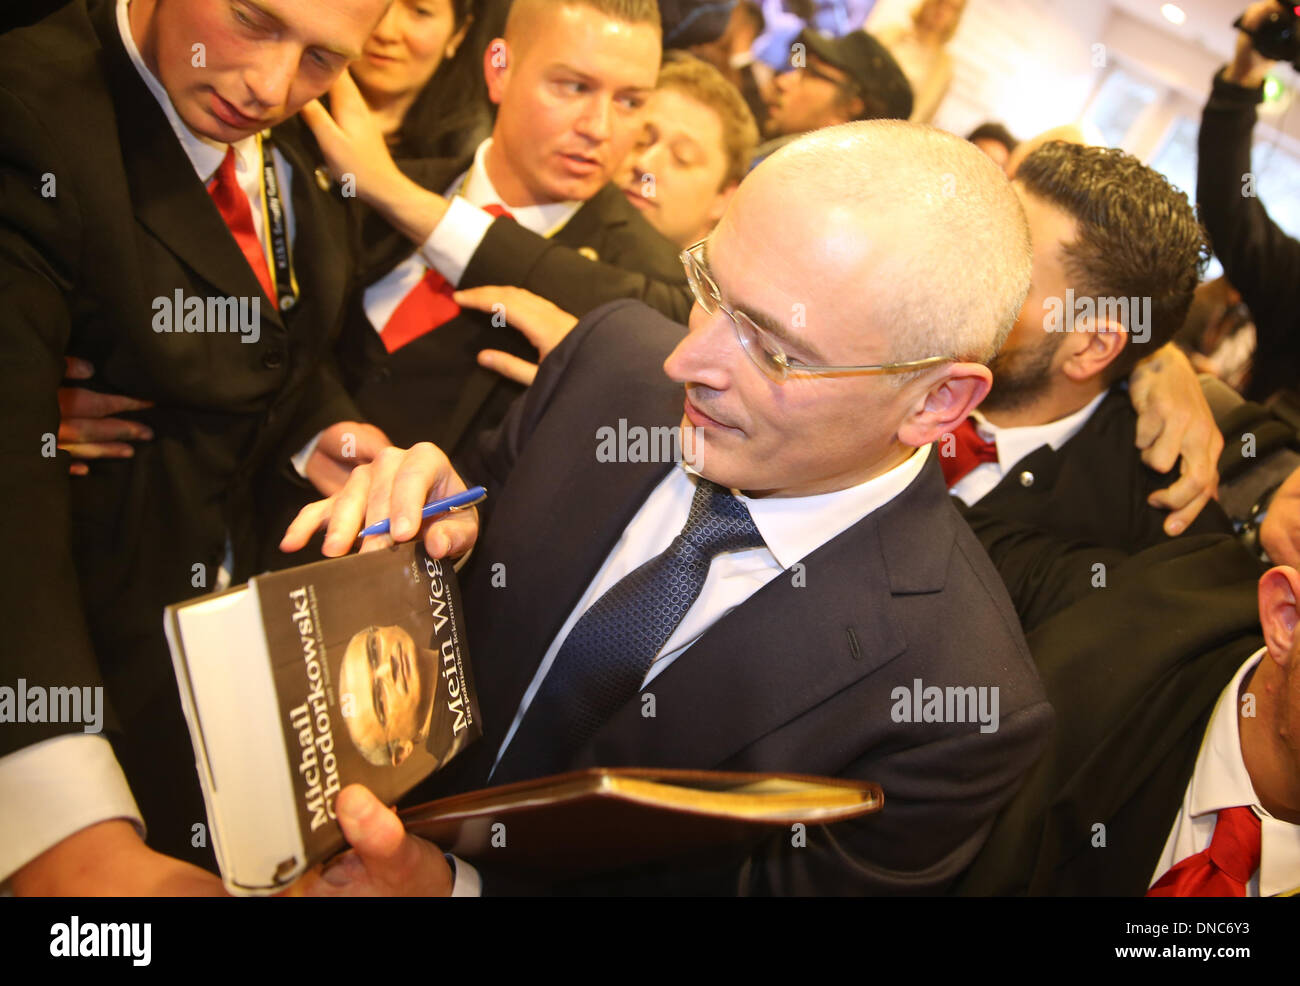 Berlin, Germany. 22nd Dec, 2013. Russian former oil tycoon Mikhail Khodorkovsky signs a book during a press conference at the Berlin Wall Museum, in Berlin, Germany, 22 December 2013 to discuss his future plans, two days after he received a pardon from prison from Russian President Vladimir Putin. Khodorkovsky, 50, who was once the richest man in Russia and spent 10 years in jail after being convicted of tax evasion and embezzlement, flew to Berlin on 20 December 2013. He has been given a one-year visa by Germany. Photo: HANNIBAL/dpa/Alamy Live News Stock Photo